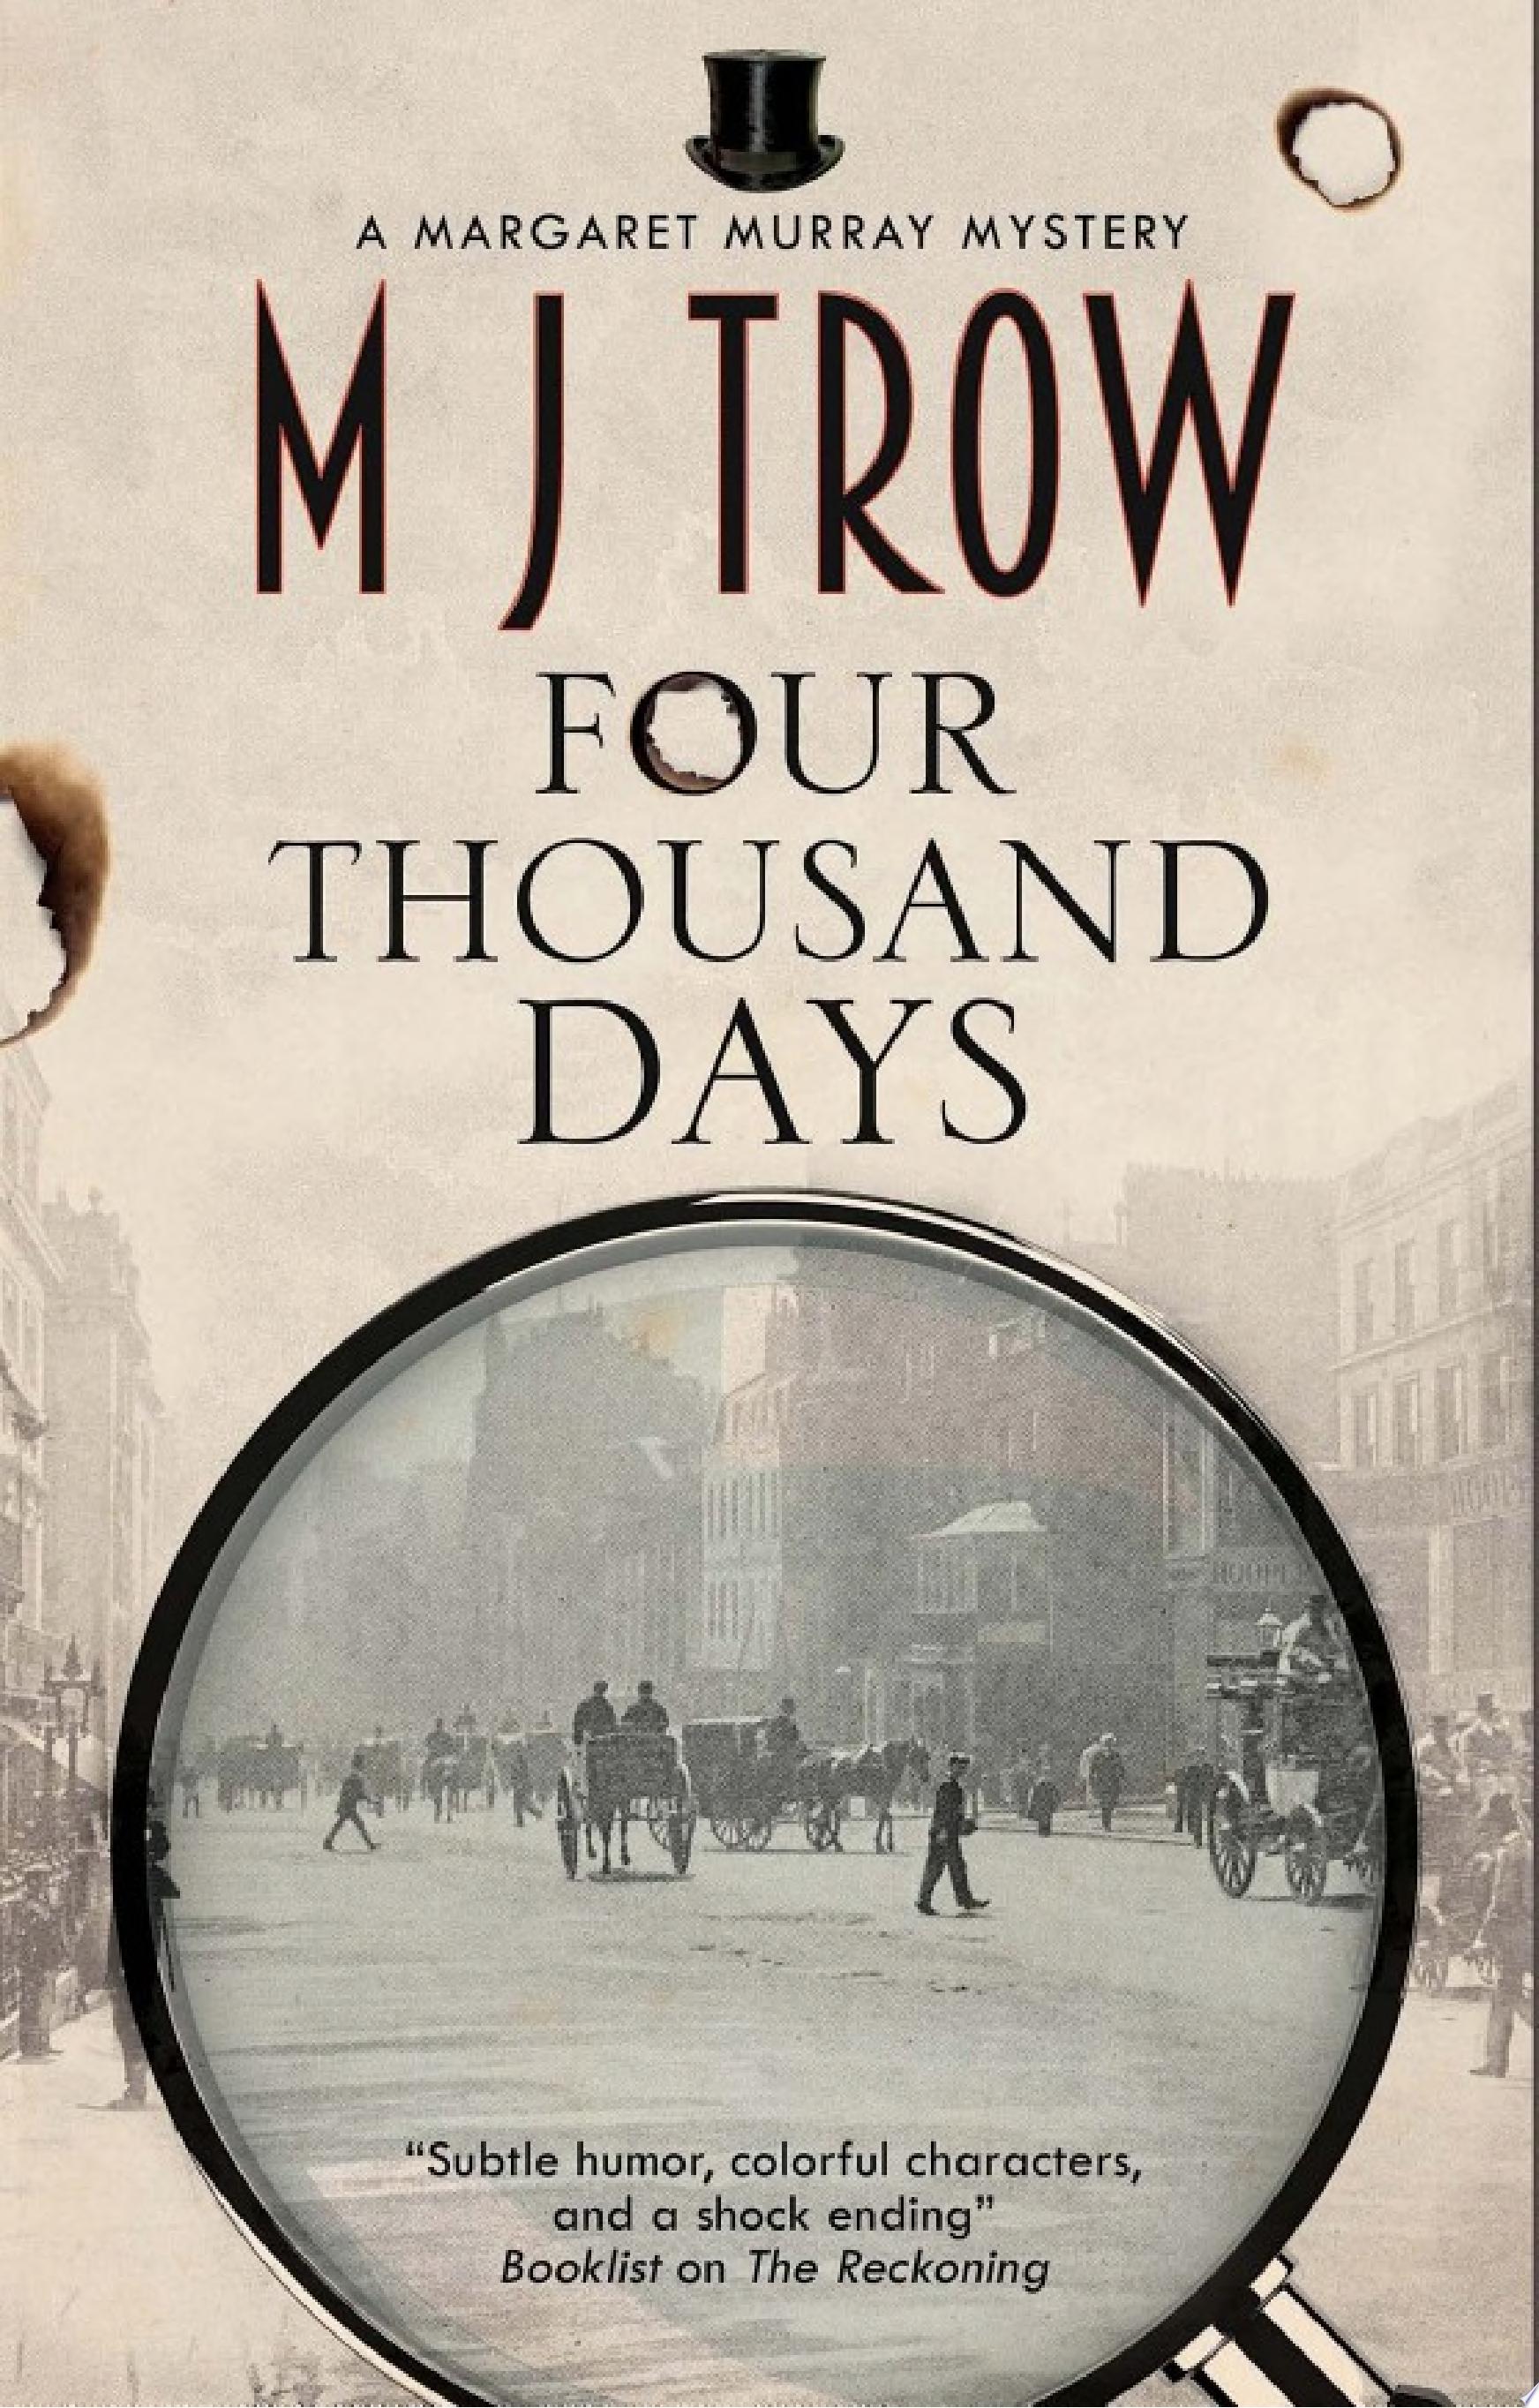 Image for "Four Thousand Days"